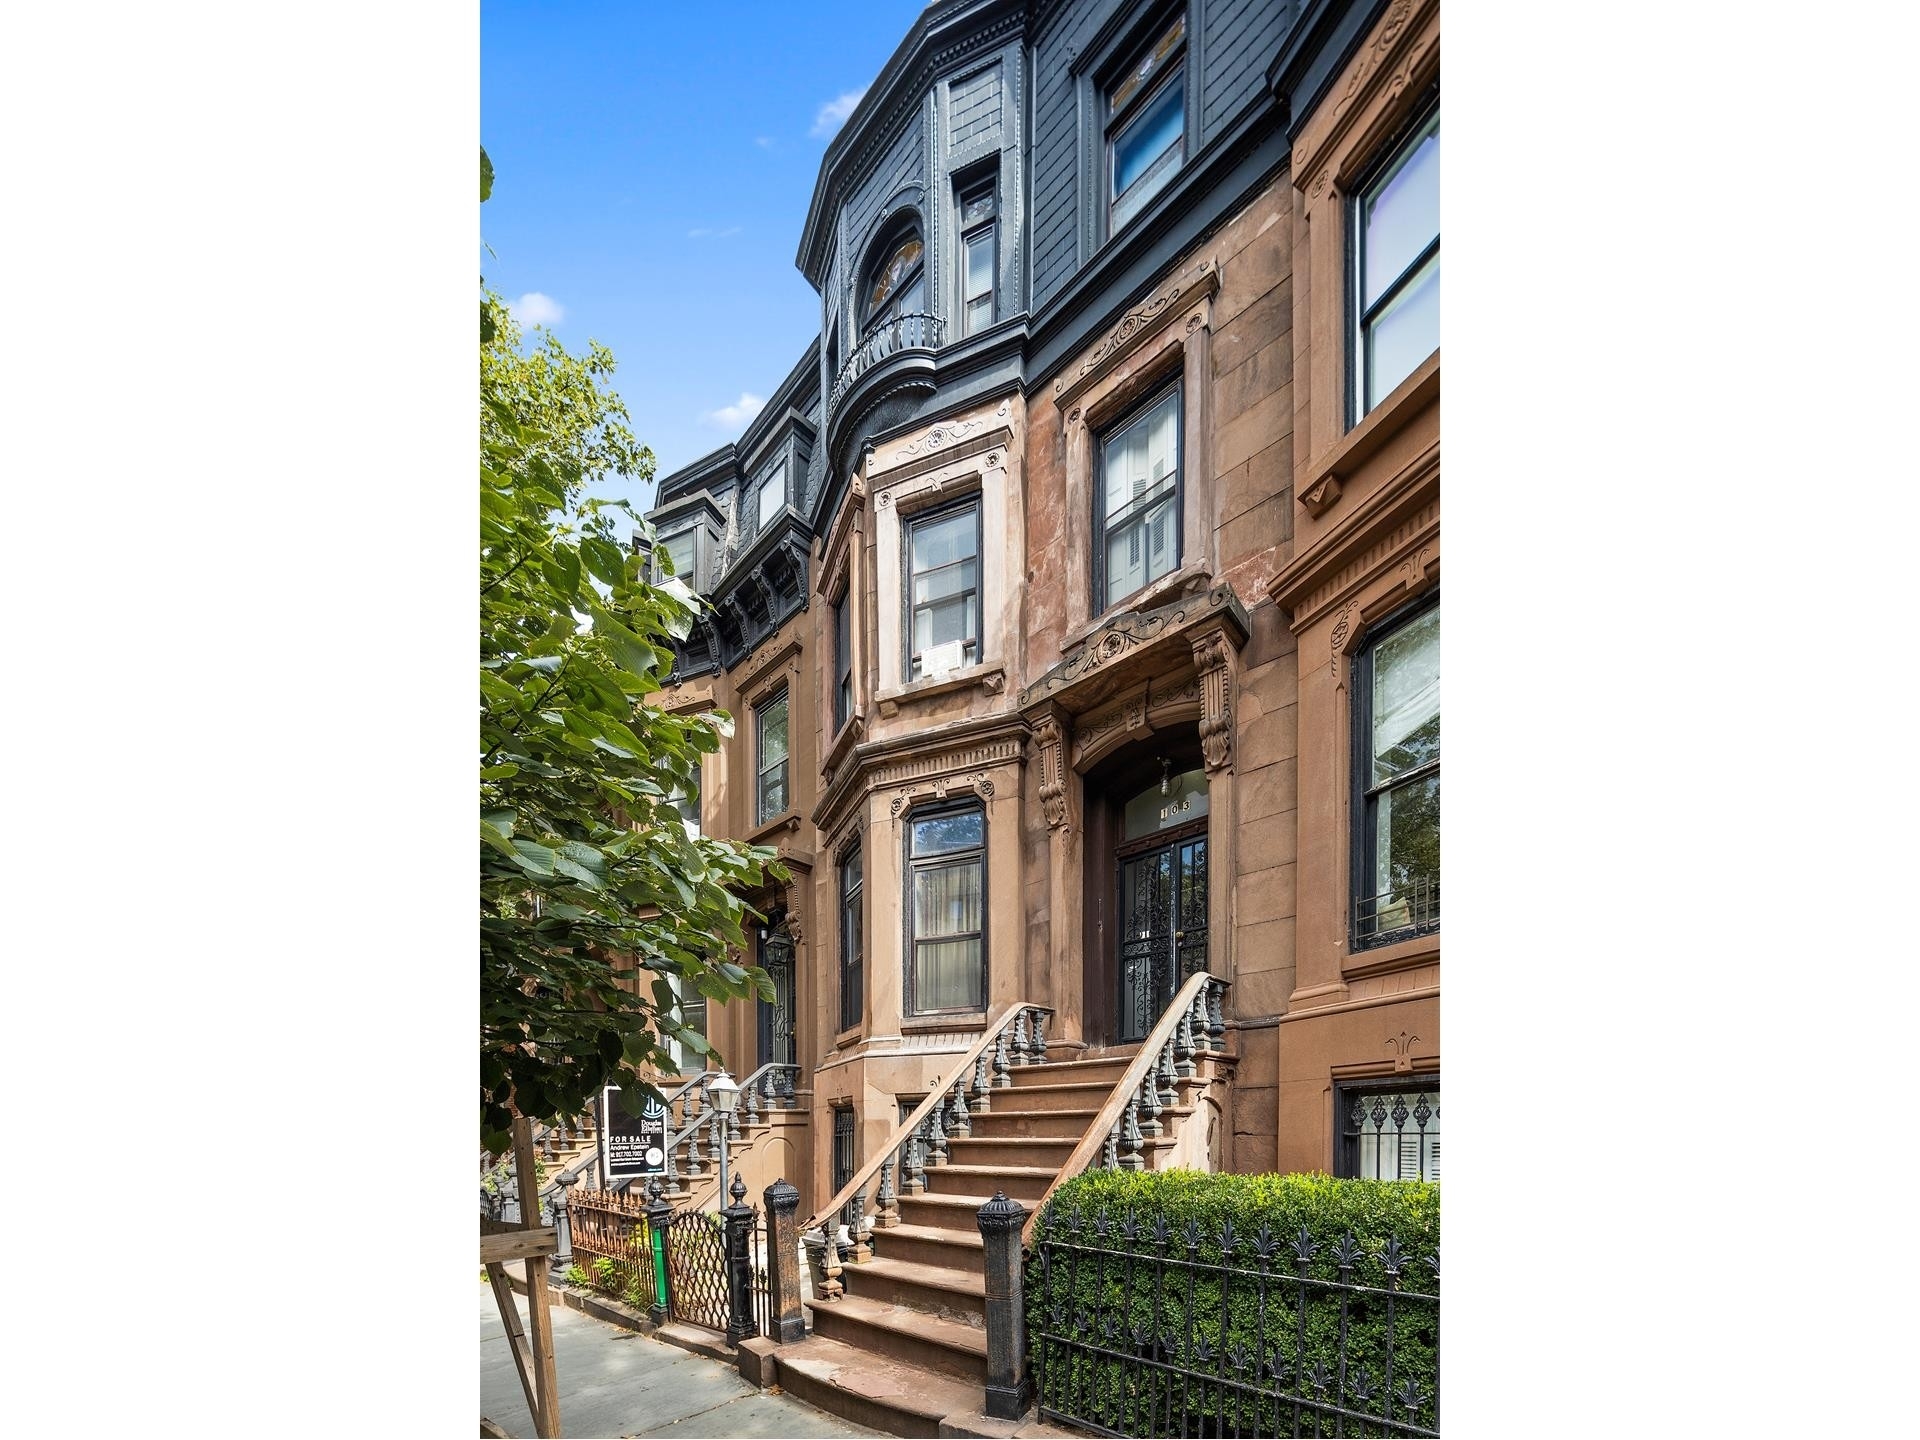 103 LINCOLN PL, TOWNHOUSE Brooklyn, NY 11217